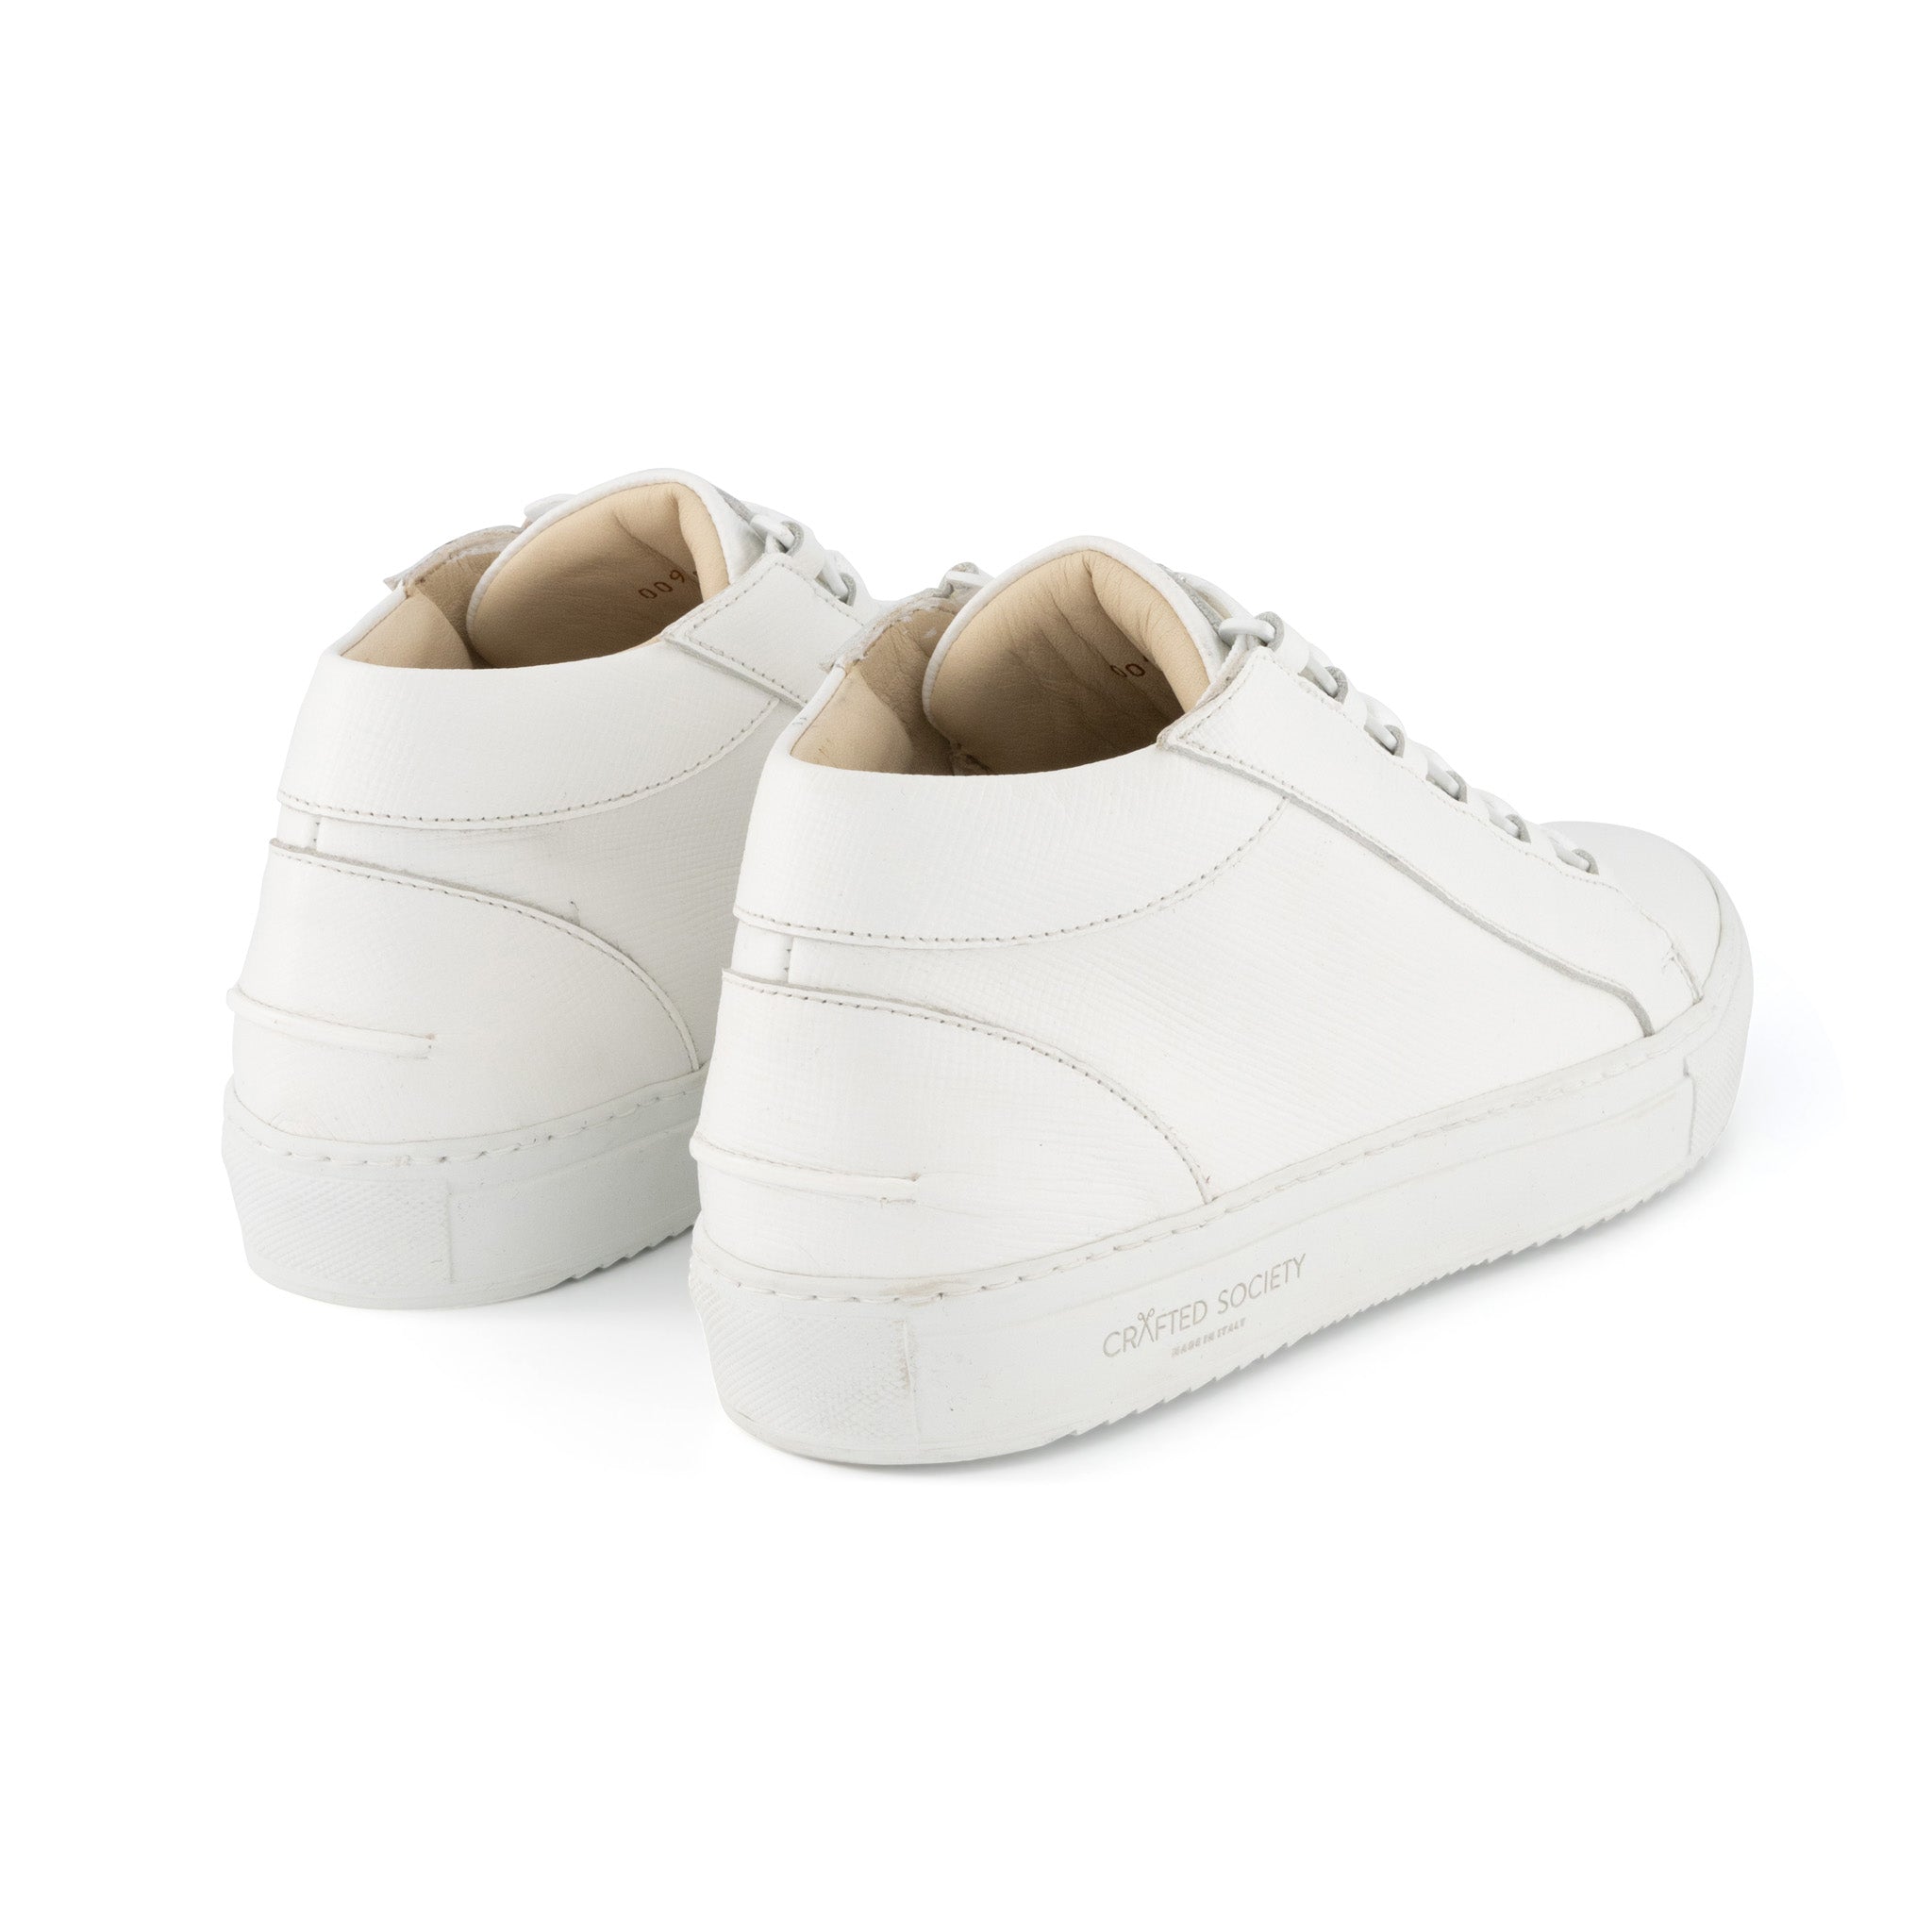 Rico Mid Sneaker | White Saffiano Leather | White Outsole | Made in Italy